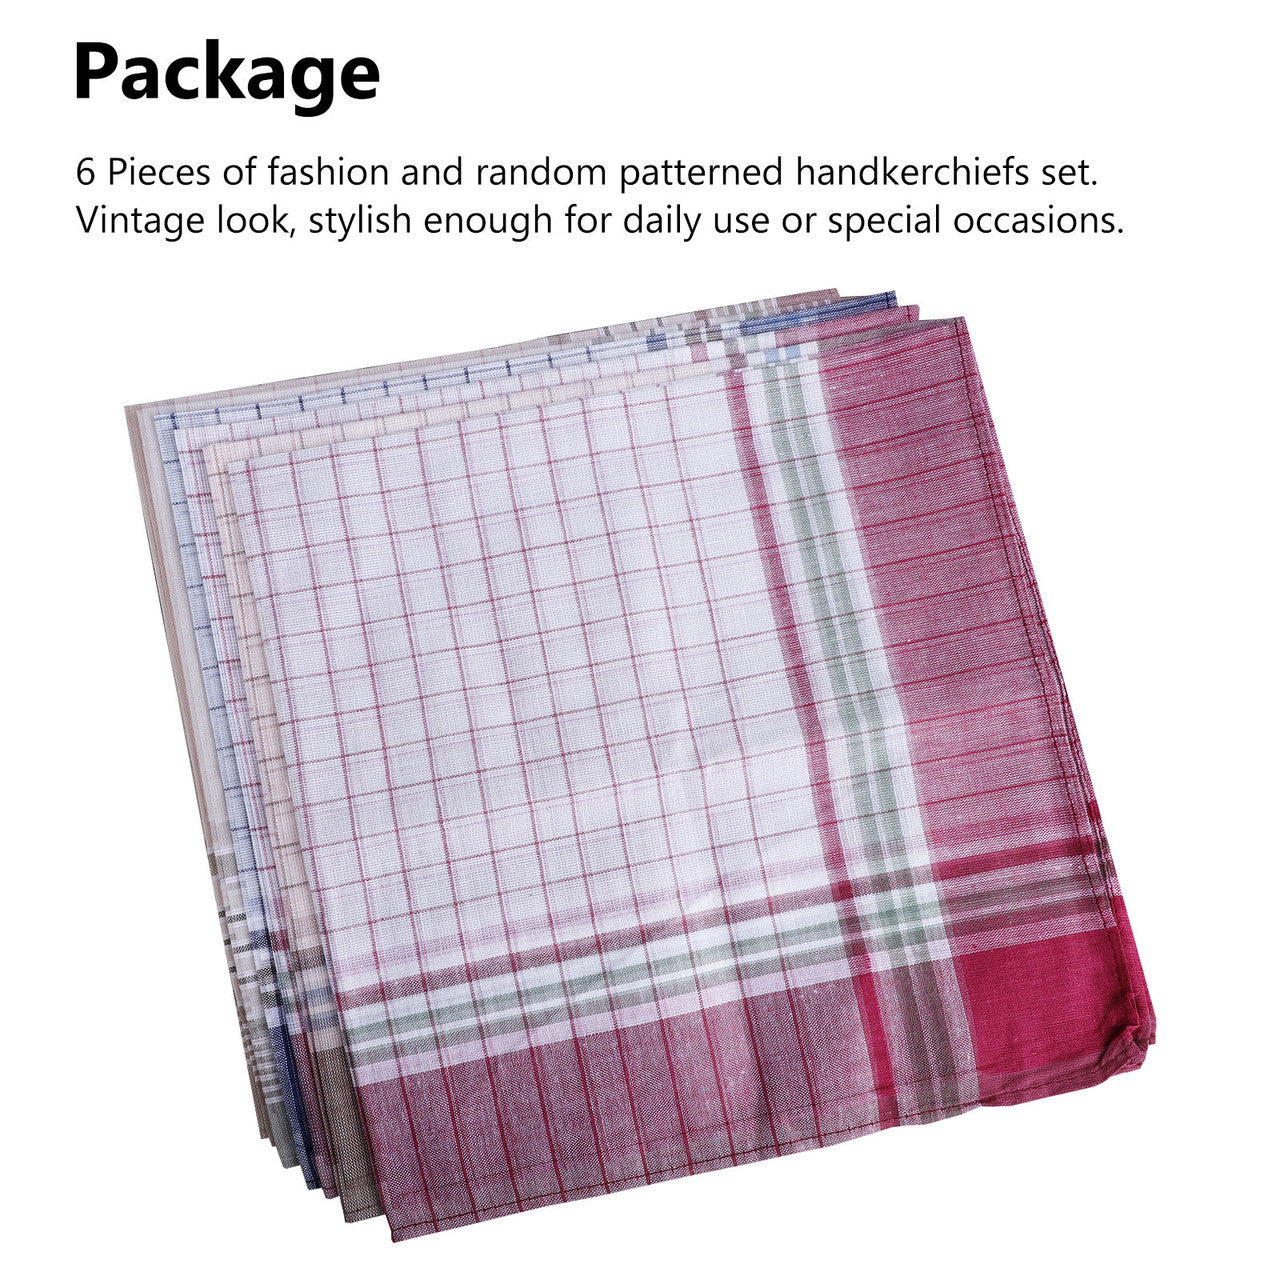 Pocket Square Hankerchiefs for Men with assorted colors and a Classic Vintage Plaid Pattern, 6pcs